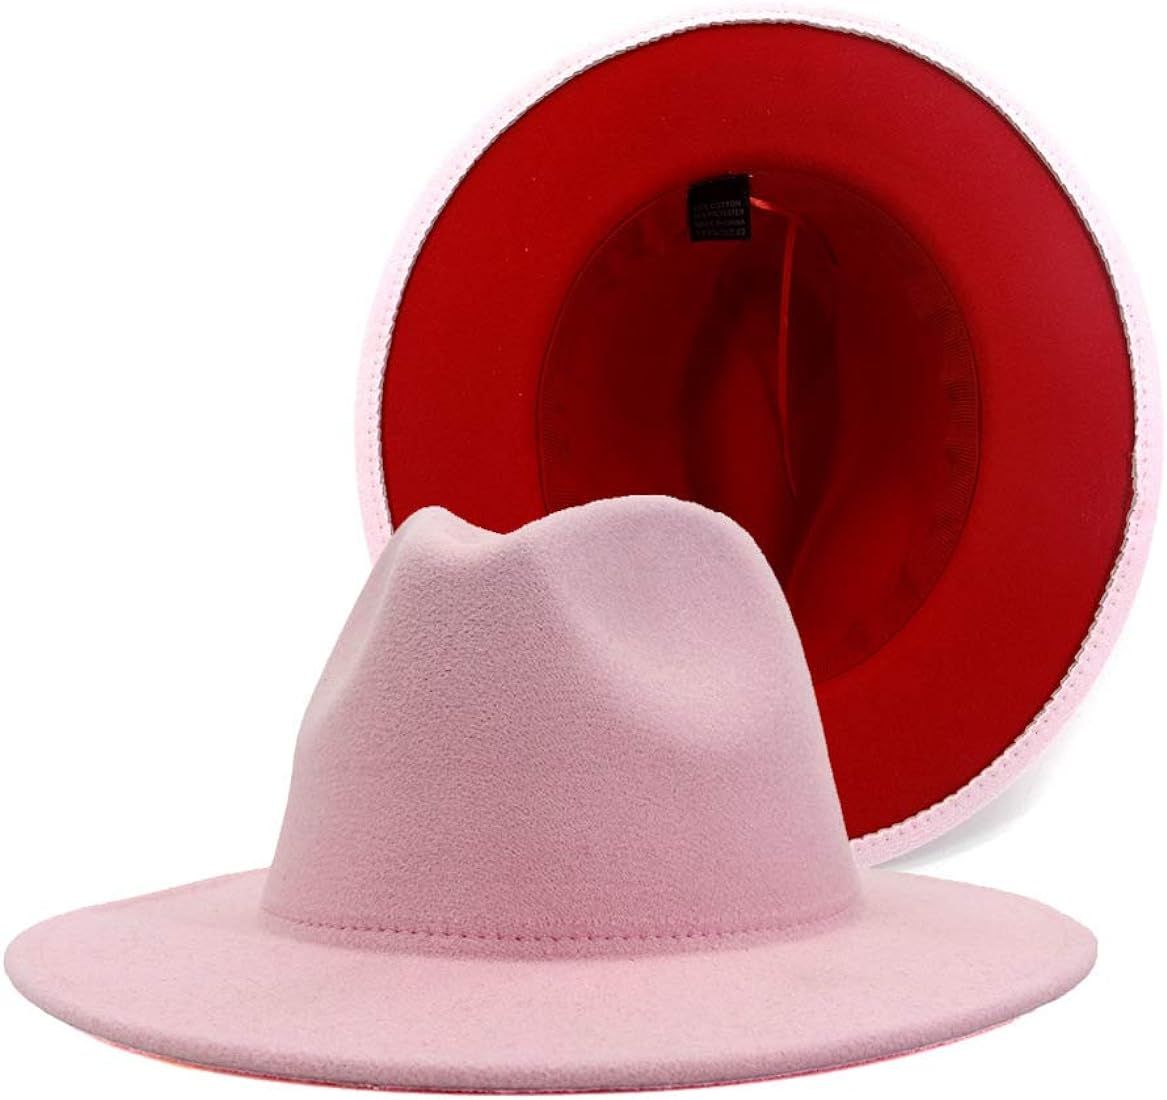 Wide Brim Fedora Hats for Women Dress Hats for Men Two Tone Panama Hat with Belt Buckle | Amazon (US)